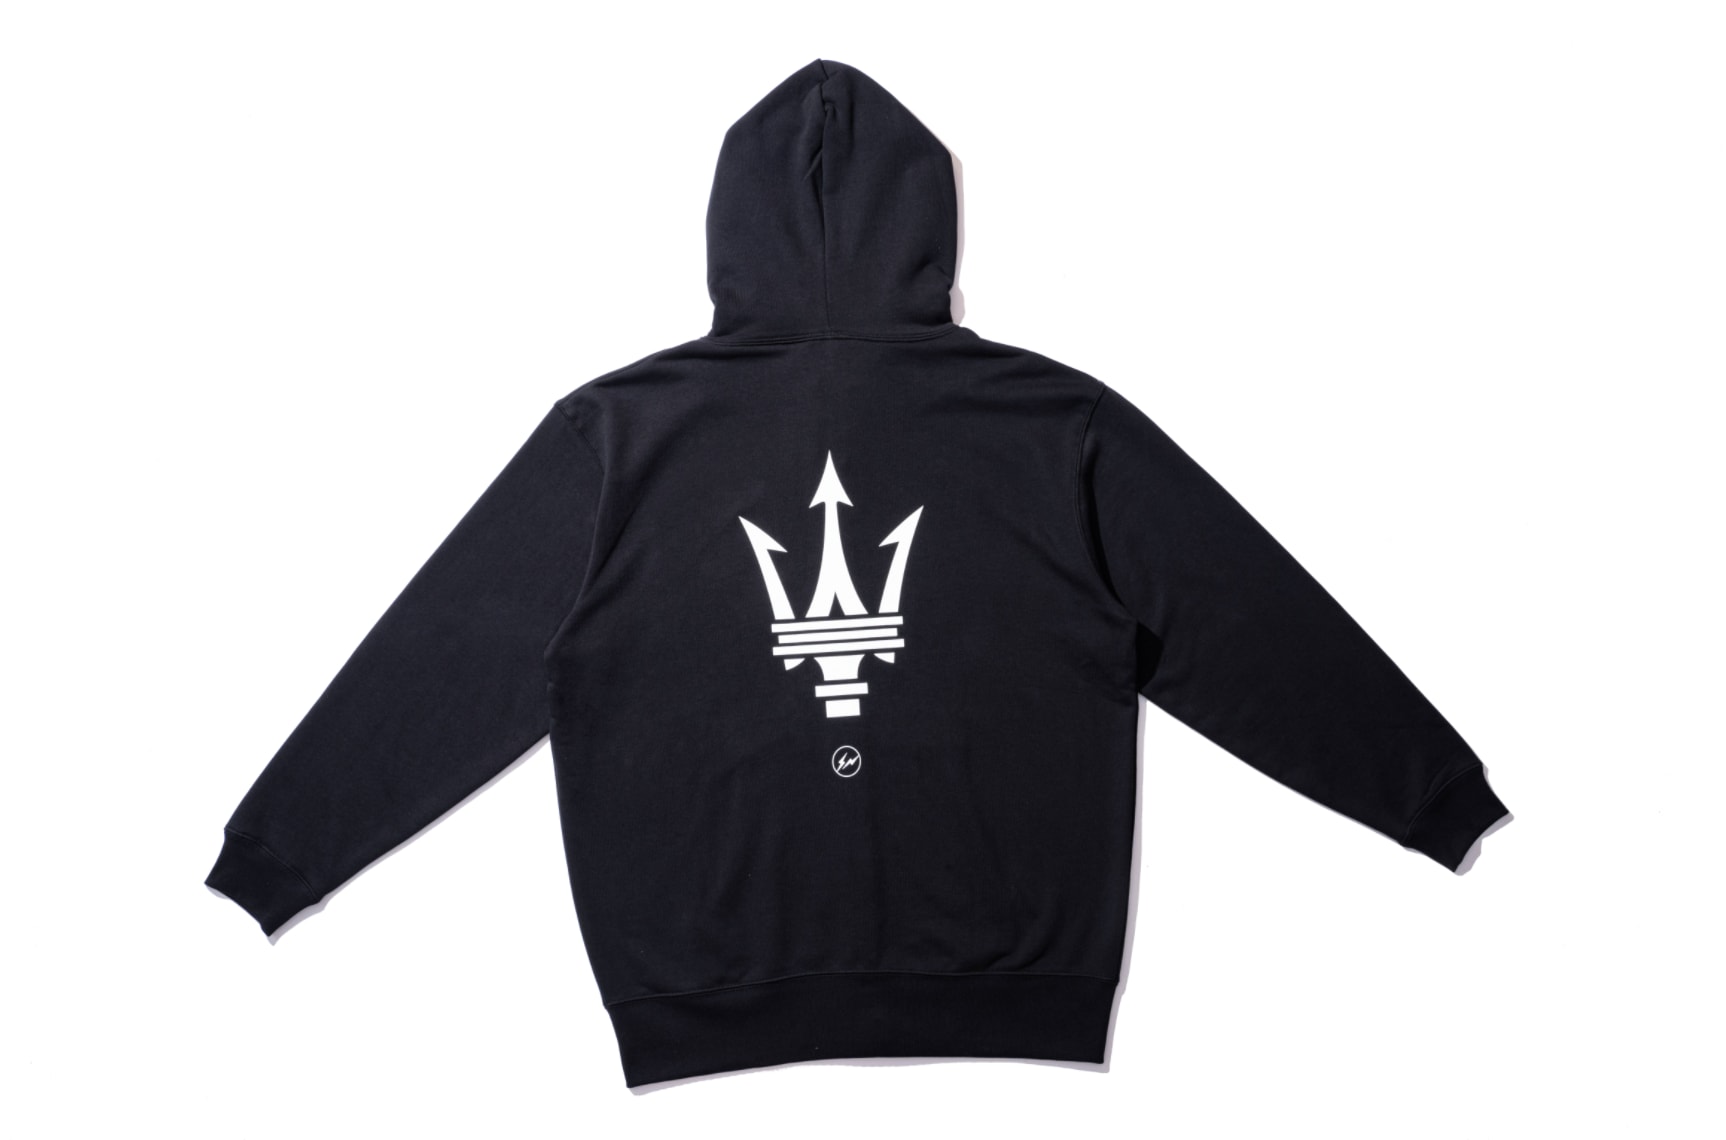 A Fragment hoodie is shown.